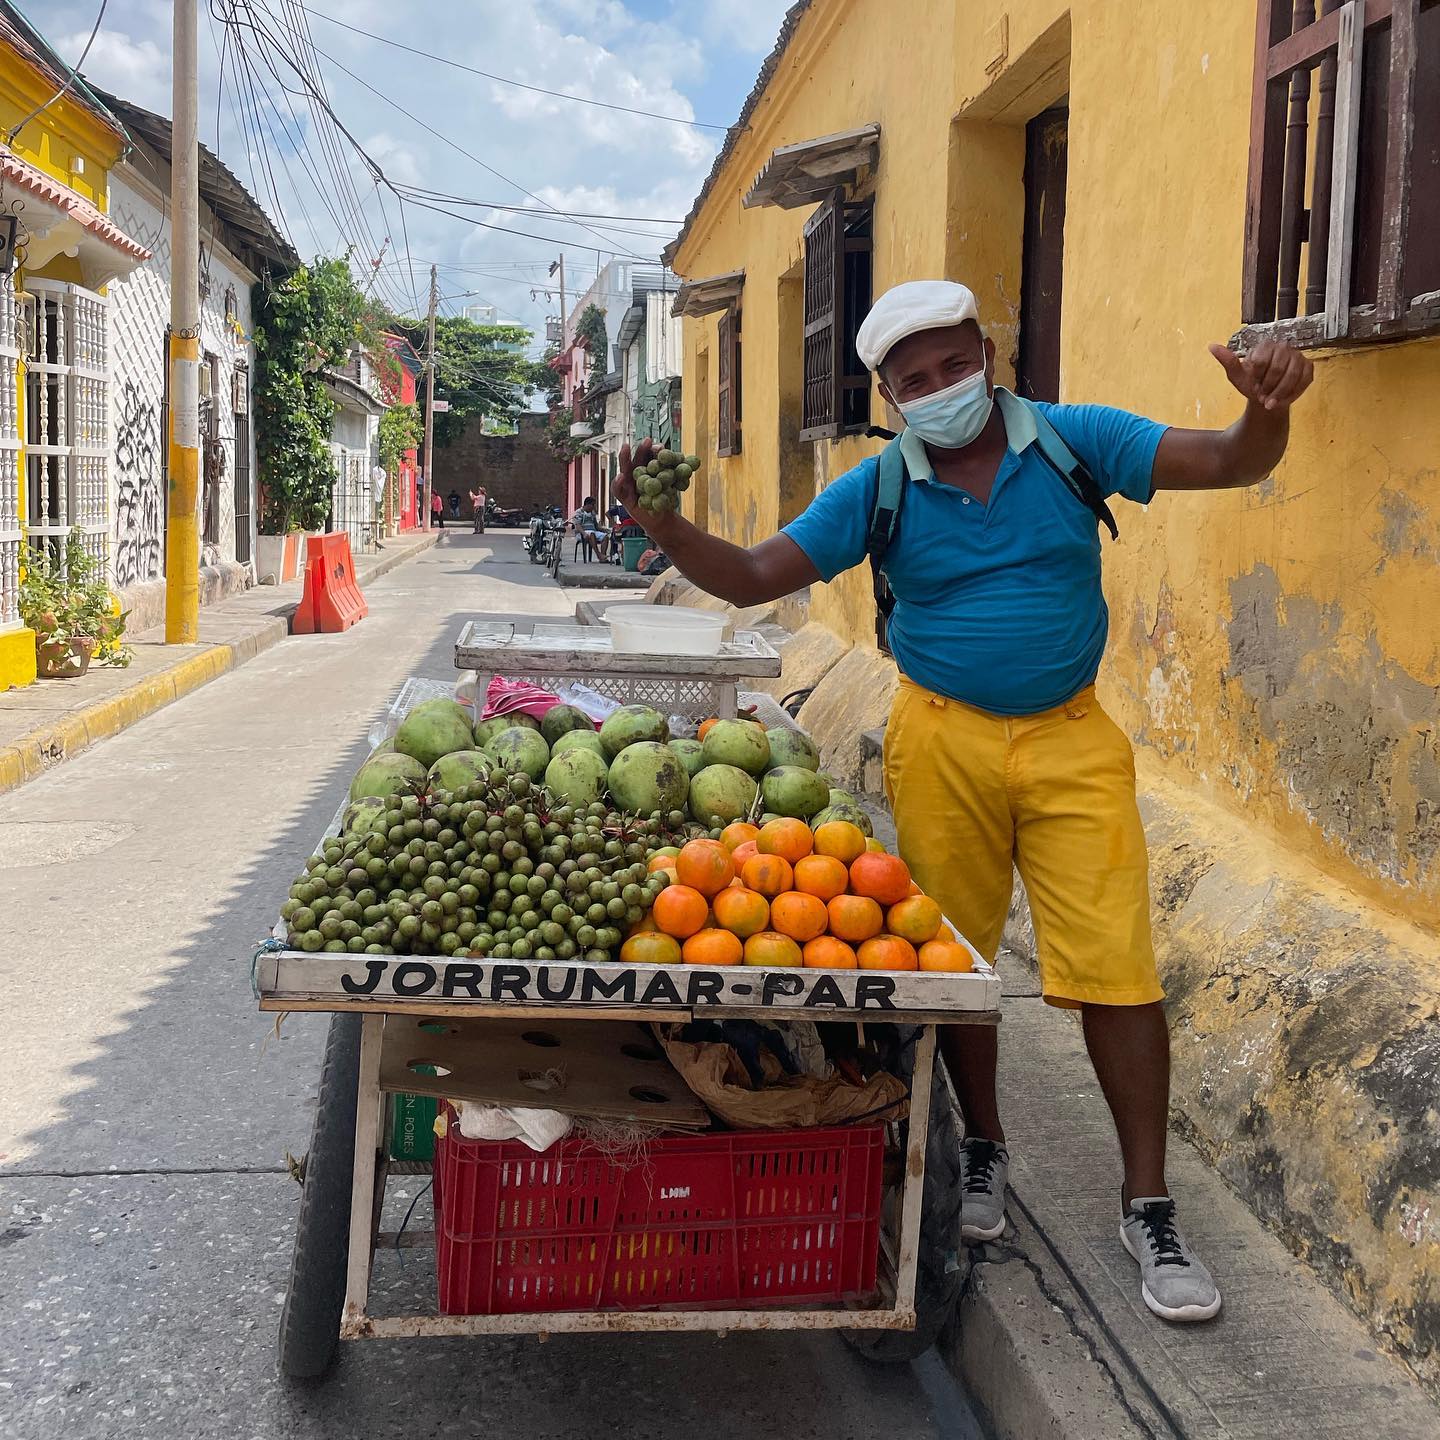 Colorful Cartagena 😍
To help the locals I like to buy fruit from the local fruit man instead of going to a supermarket and I love to buy a fruit juice on the streets. 
The city of Cartagena in Colombia was one of my favorite places of this worldtrip 🤩 I danced salsa almost every day and I met so many nice people here! This was the place where I met @jennyvoss_ and @perdido051 (Oscar) 🥰 
I definitely have the wish to return to Colombia to finish my trip because I left this country to go back to The Netherlands to surprise my family for Christmas 2021 😁

#cartagenacolombia #colombiatravel #wereldreis #cartagenacolombia🇨🇴 #backpackinglife #localsofcartagena #backpacktraveller #travellifestyle #fulltimetraveler #cartagenadeindiascolombia #passionpassport #southamericatravel #colorfulcolombia #streetphotographersmagazine #happiness #travellusting #solotravels